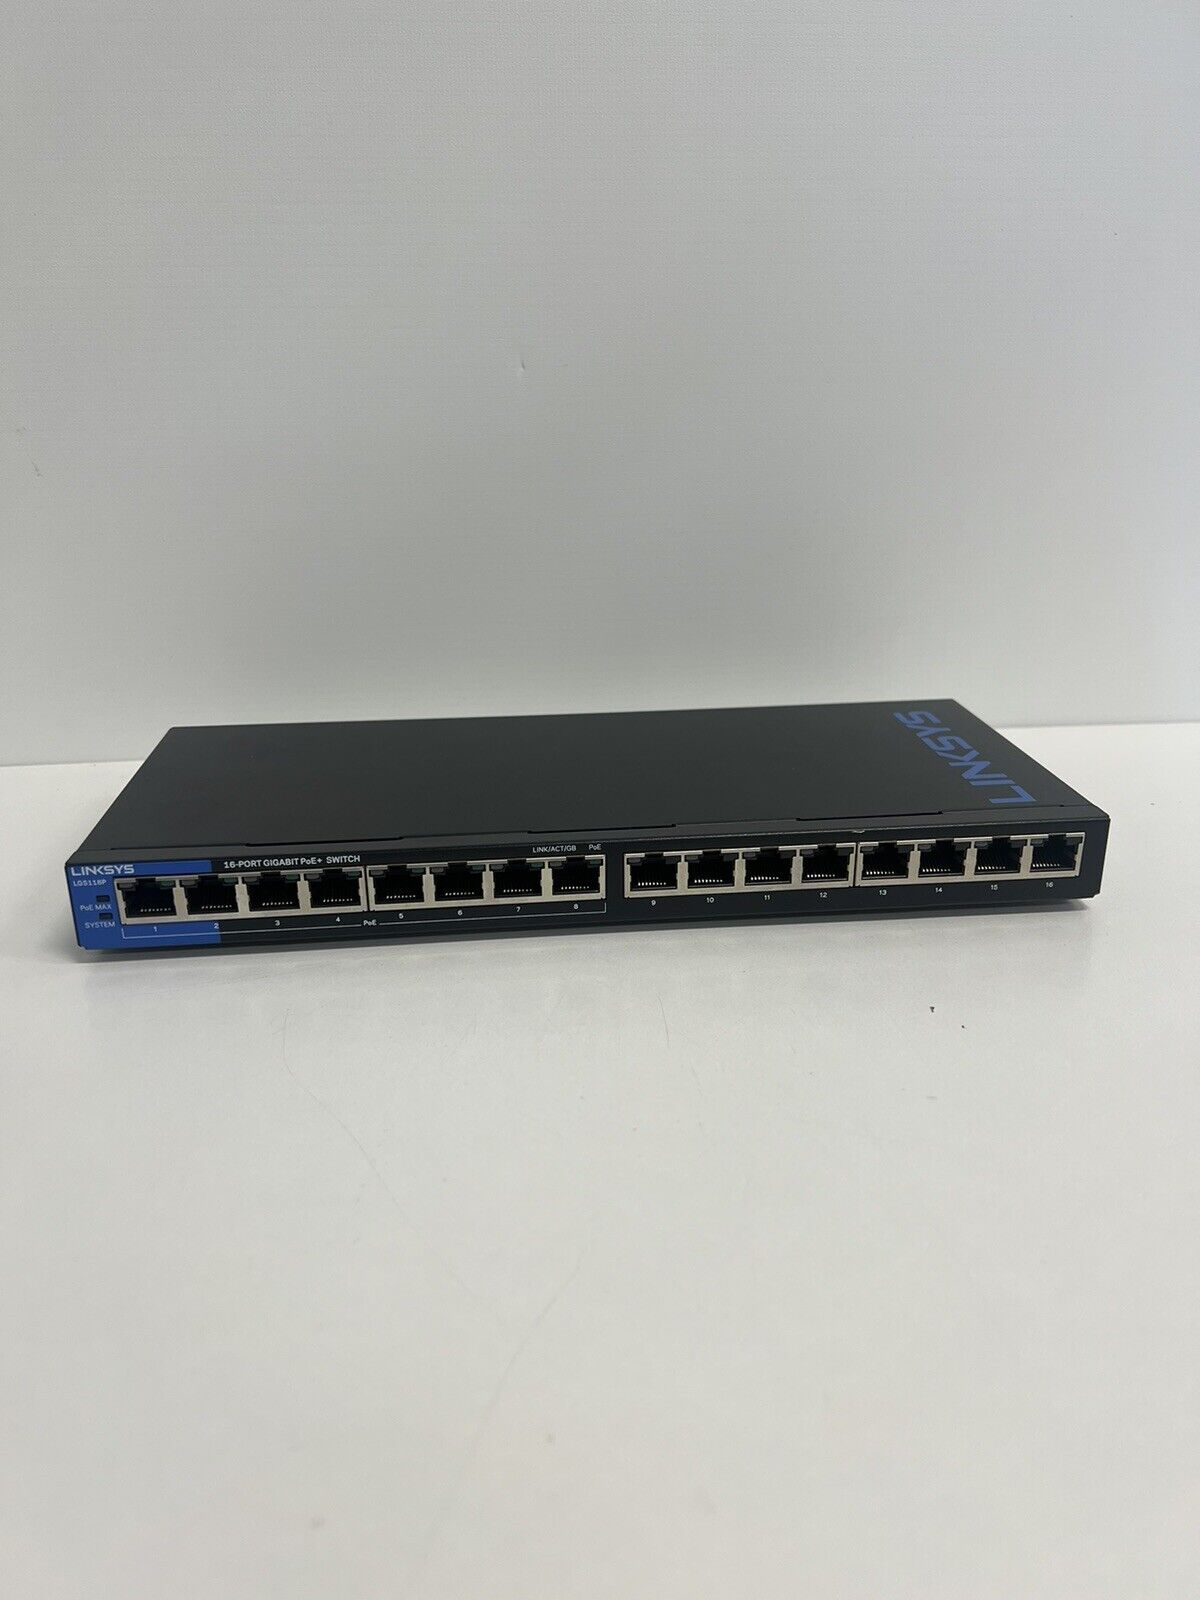 Linksys LGS116P 16-Port Gigabit PoE+ Switch WORKS GREAT but NO POWER SUPPLY